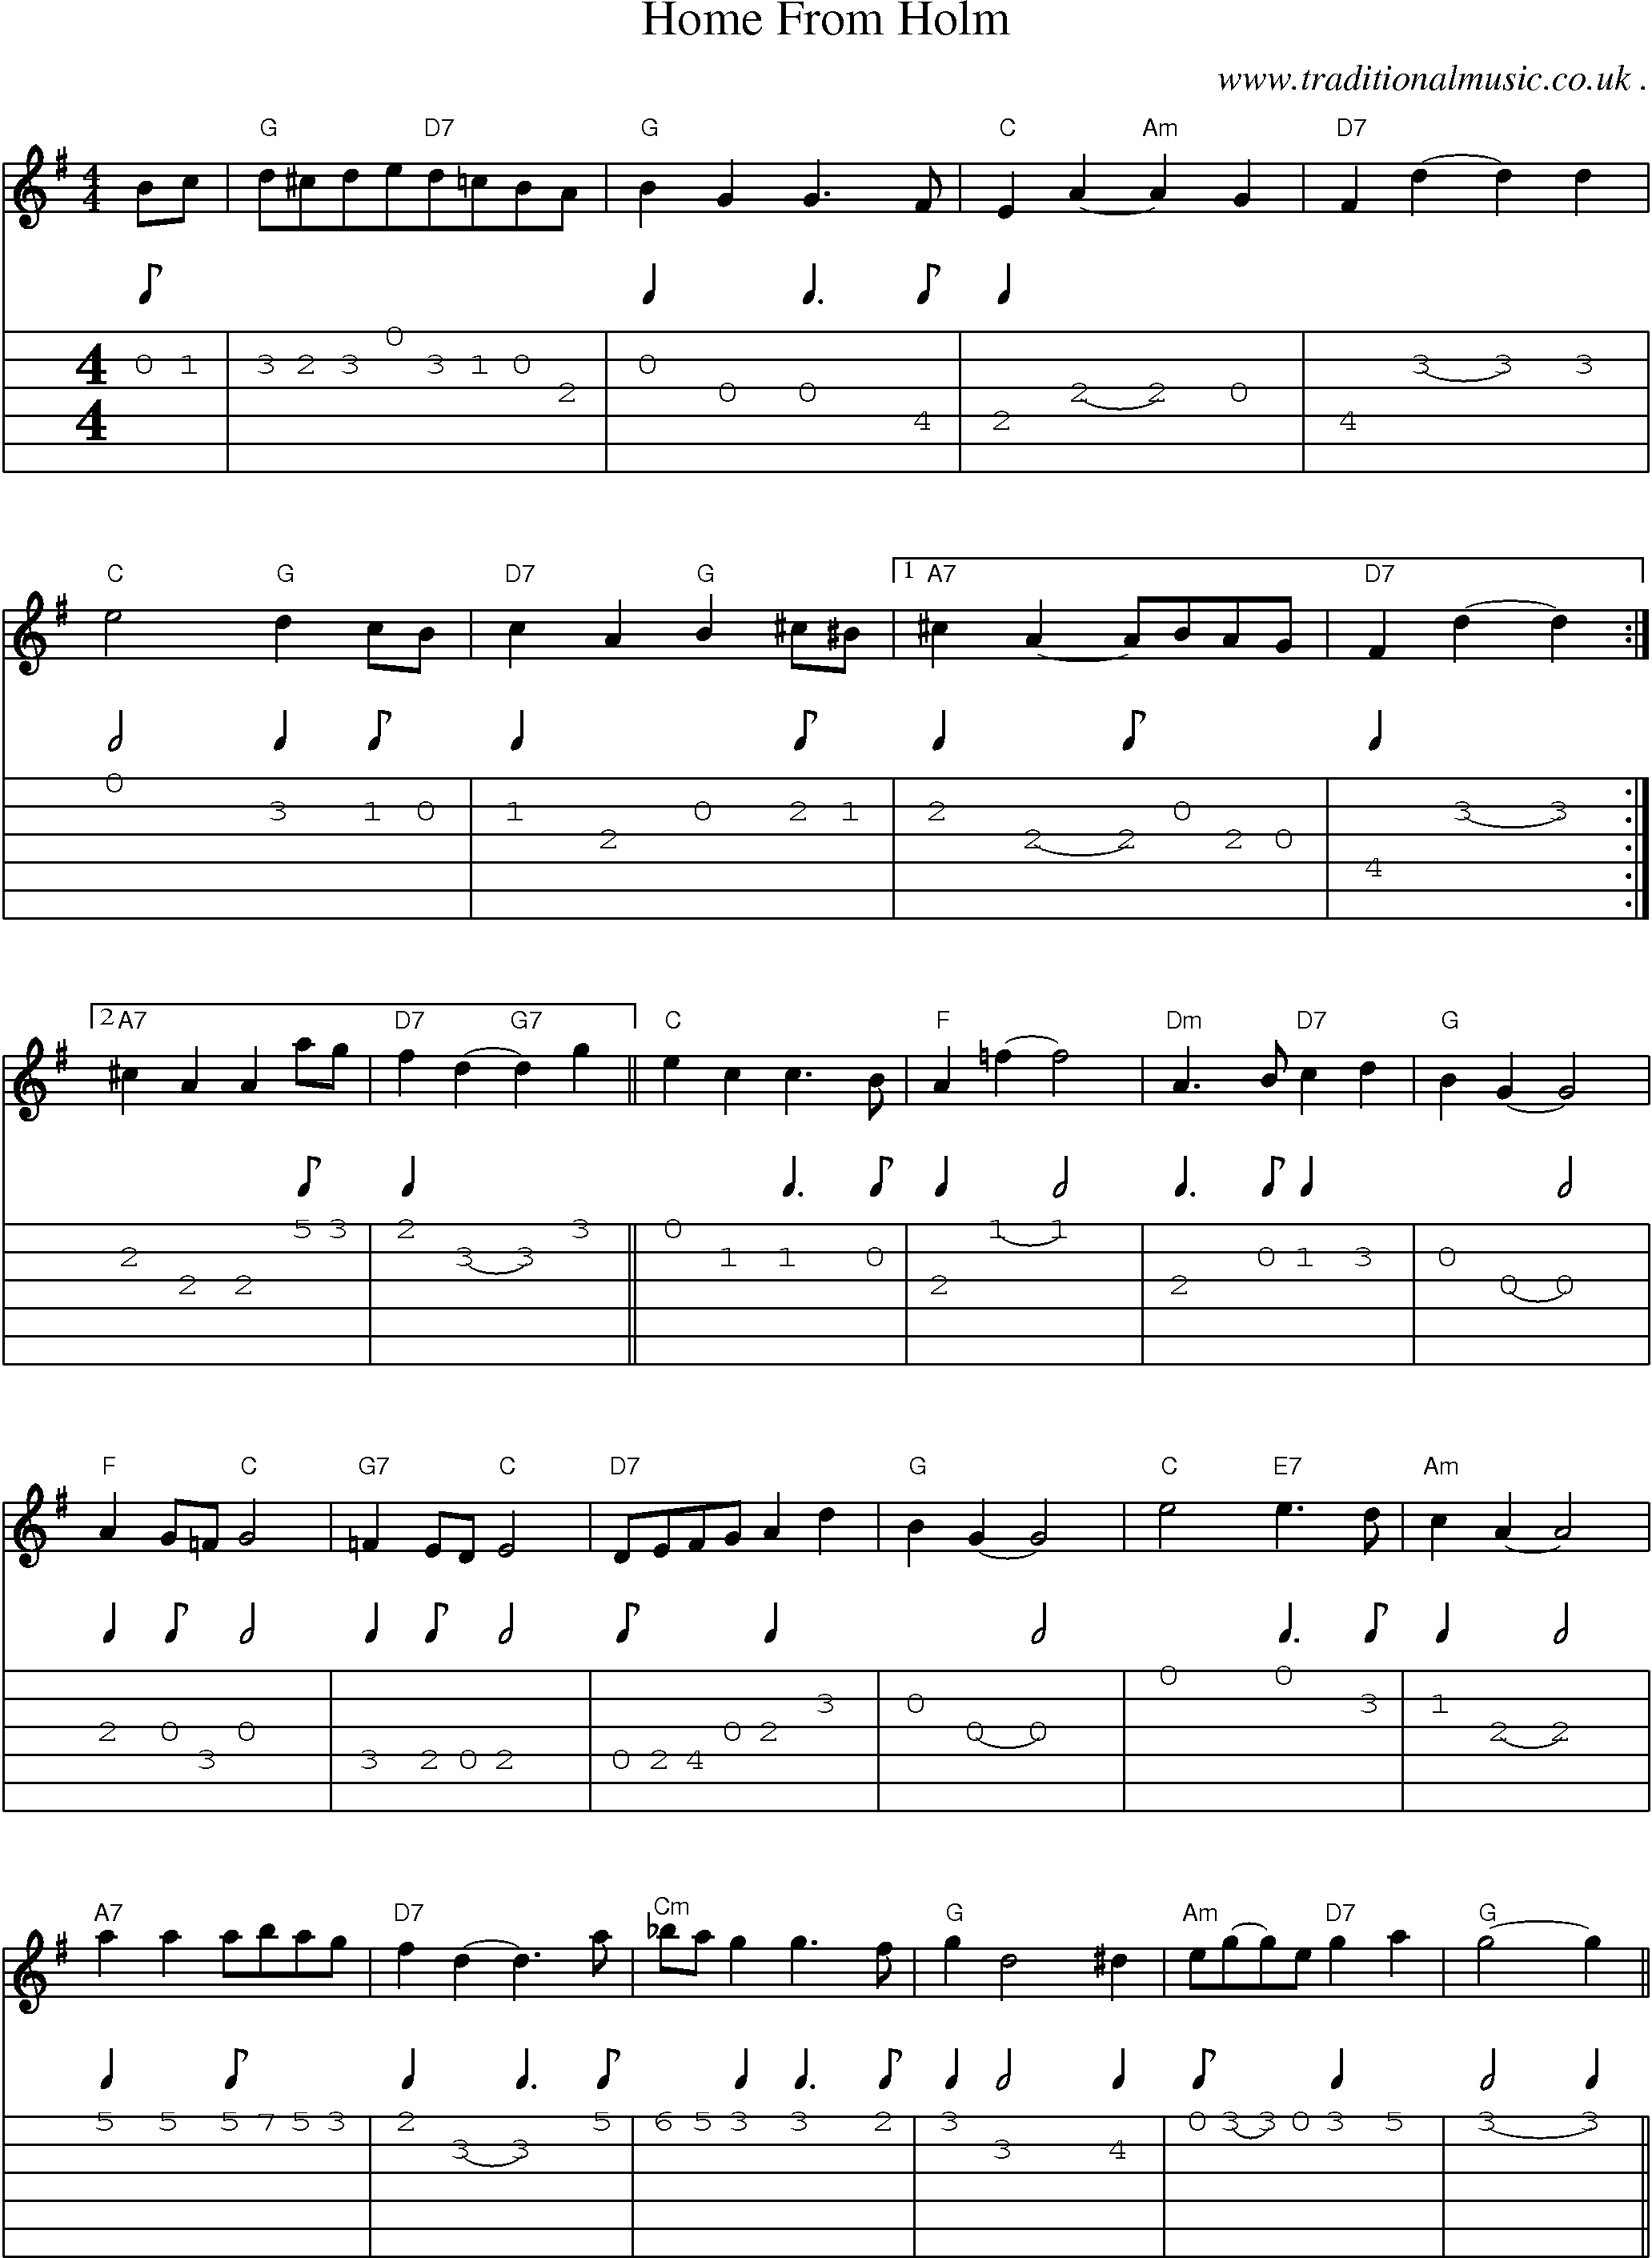 Sheet-Music and Guitar Tabs for Home From Holm